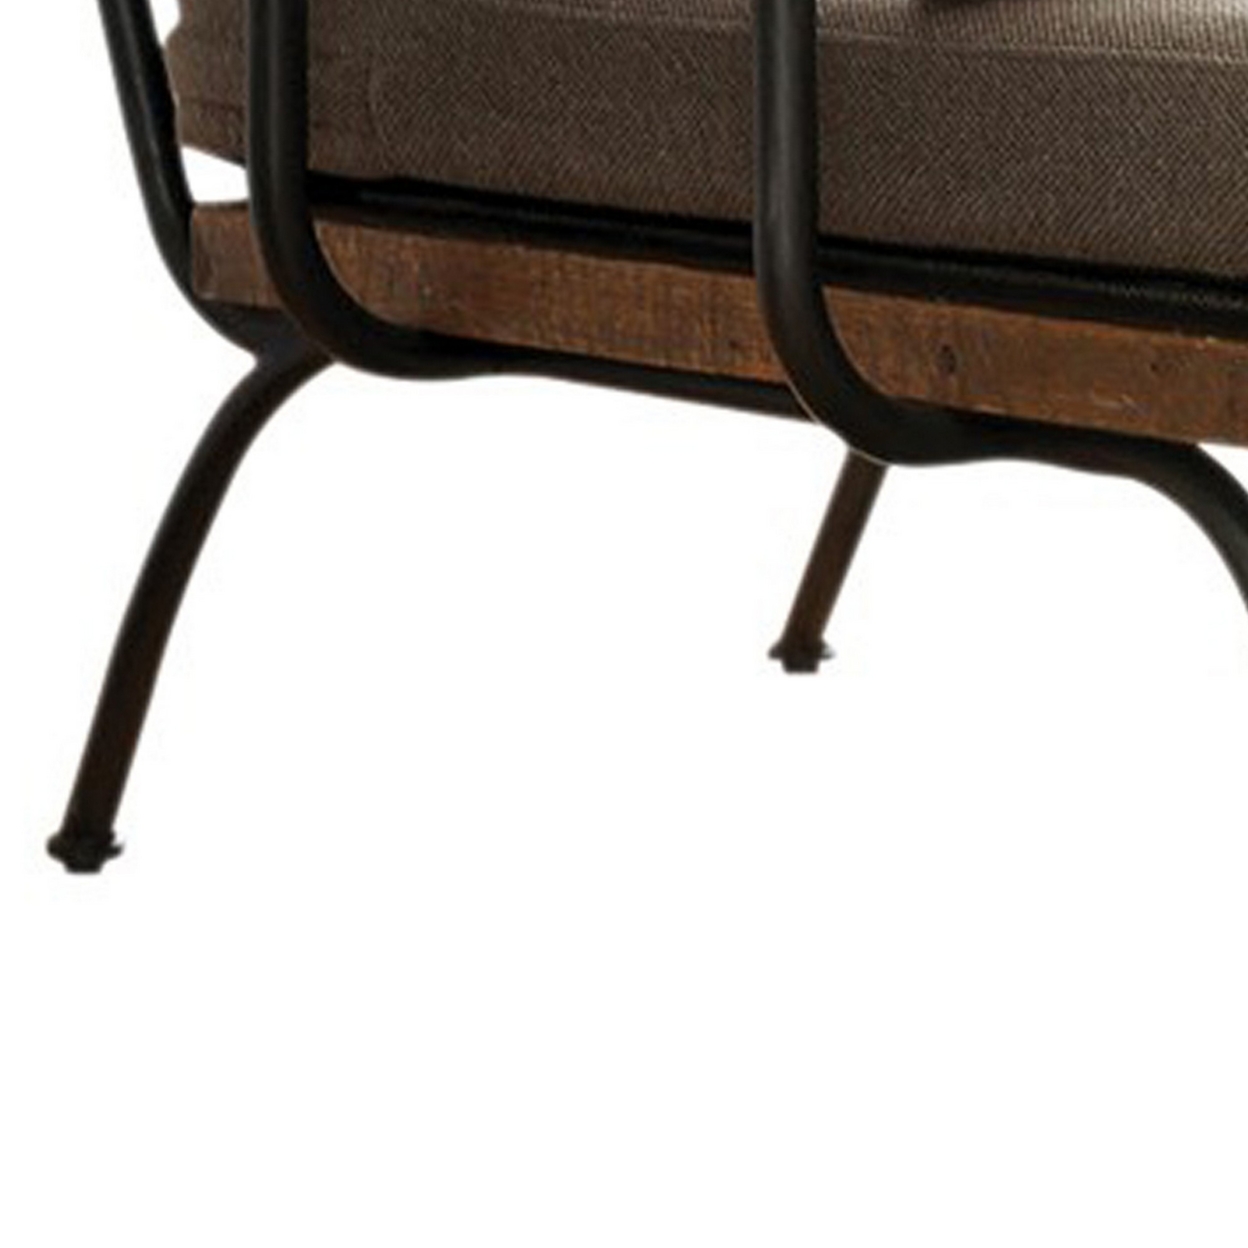 Fabric Upholstered Accent Chair, In Brown And Black- Saltoro Sherpi